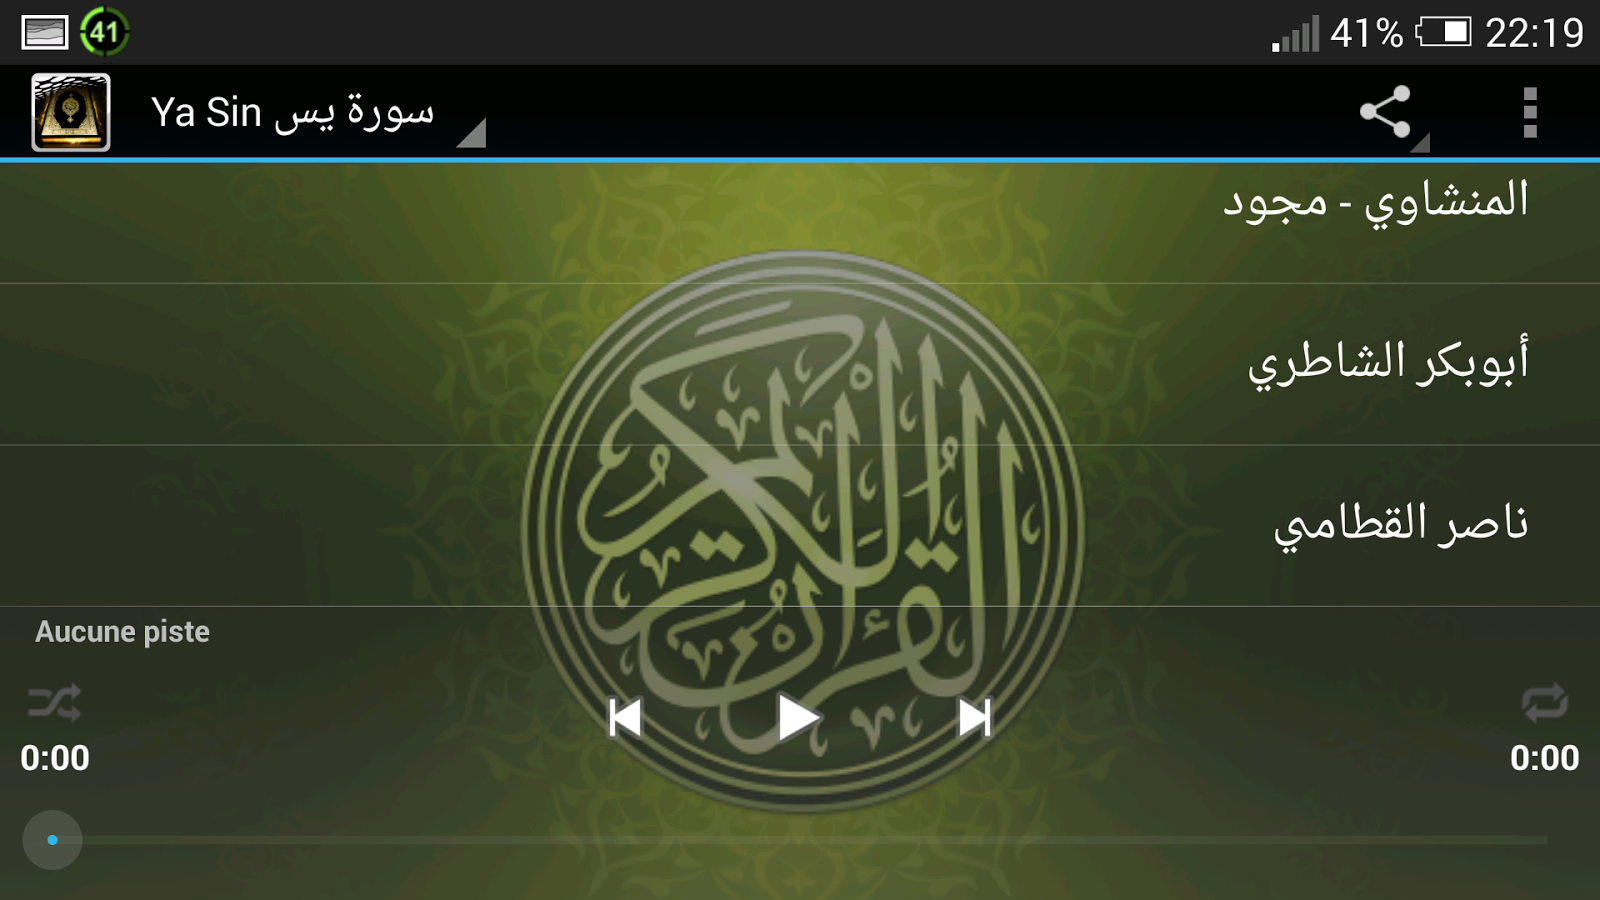 Yasin Quran Mp3 - Android Apps on Google Play